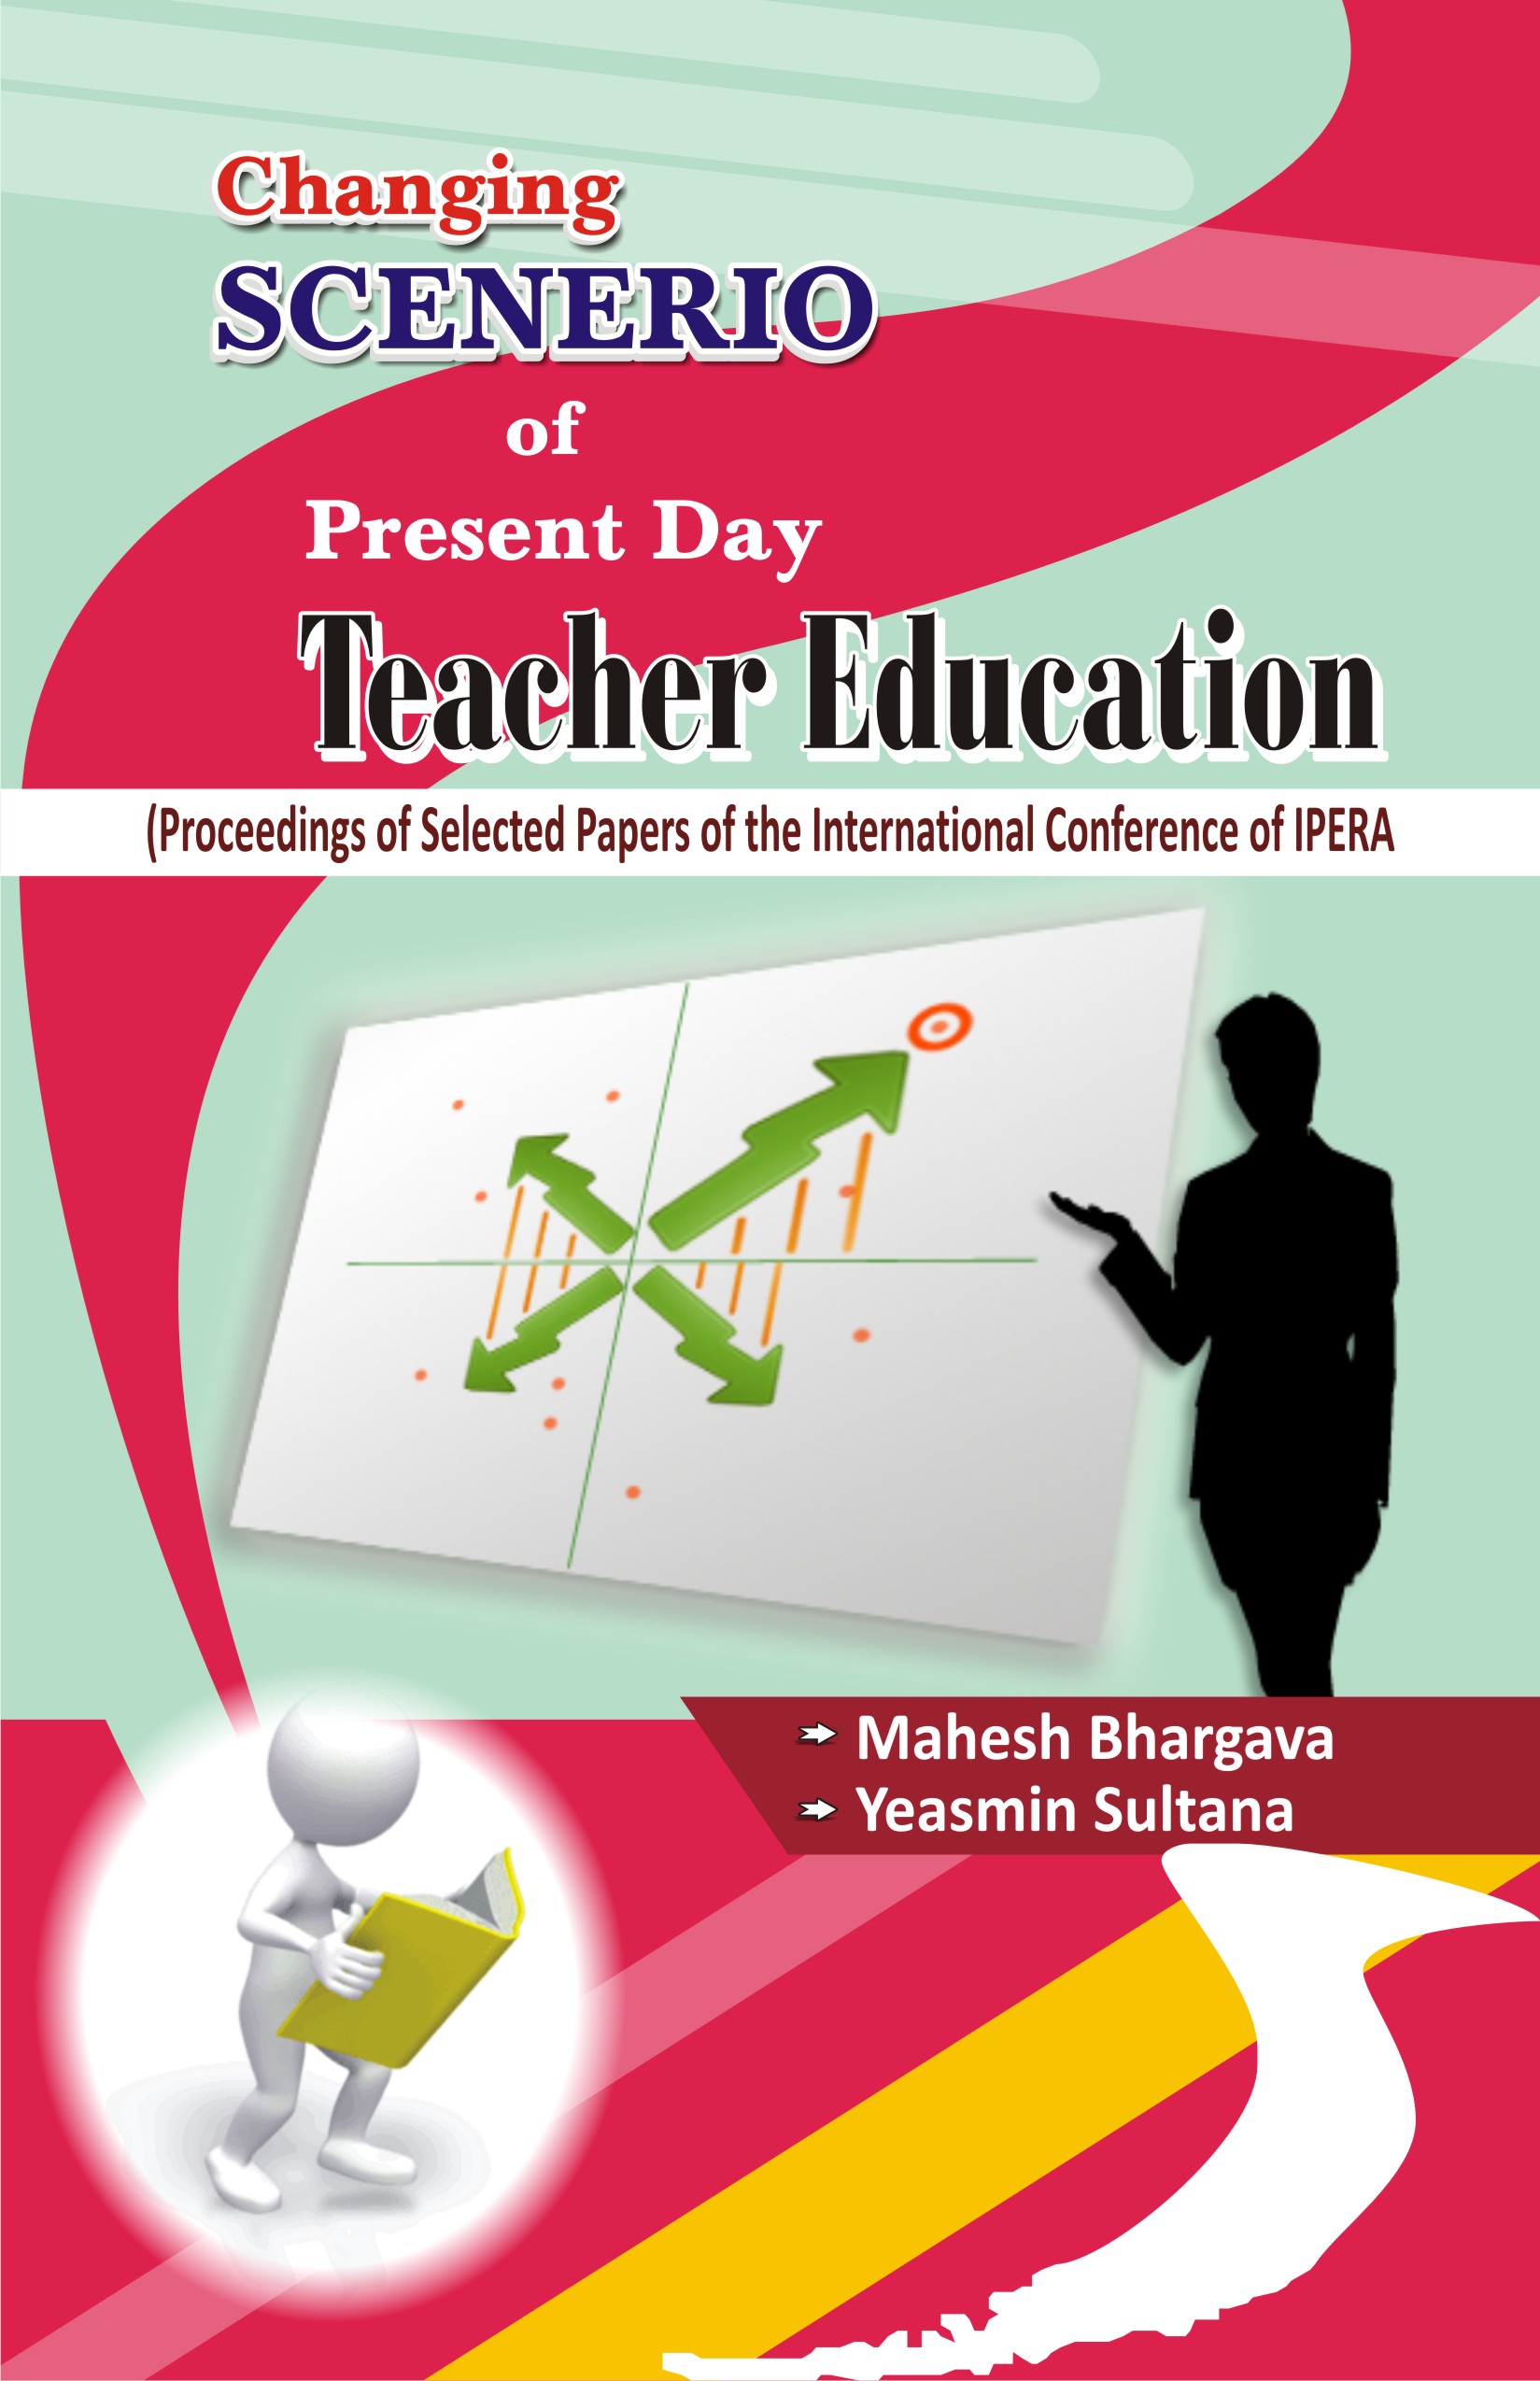 CHANGING-SCENERIO-OF-PRESENT-DAY-TEACHER-EDUCATION